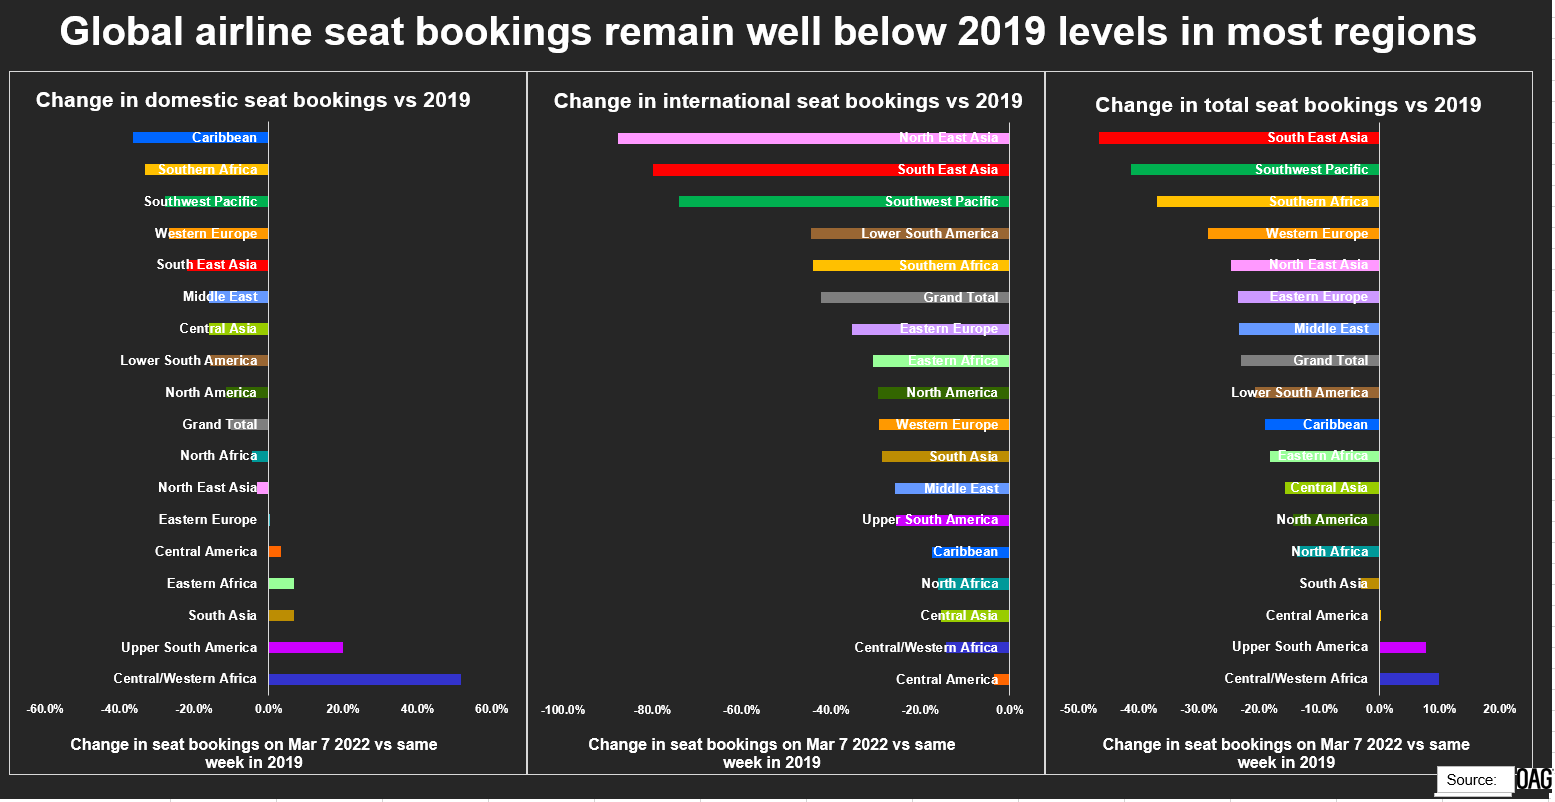 Global airline seat bookings remain well below 2019 levels in most regions